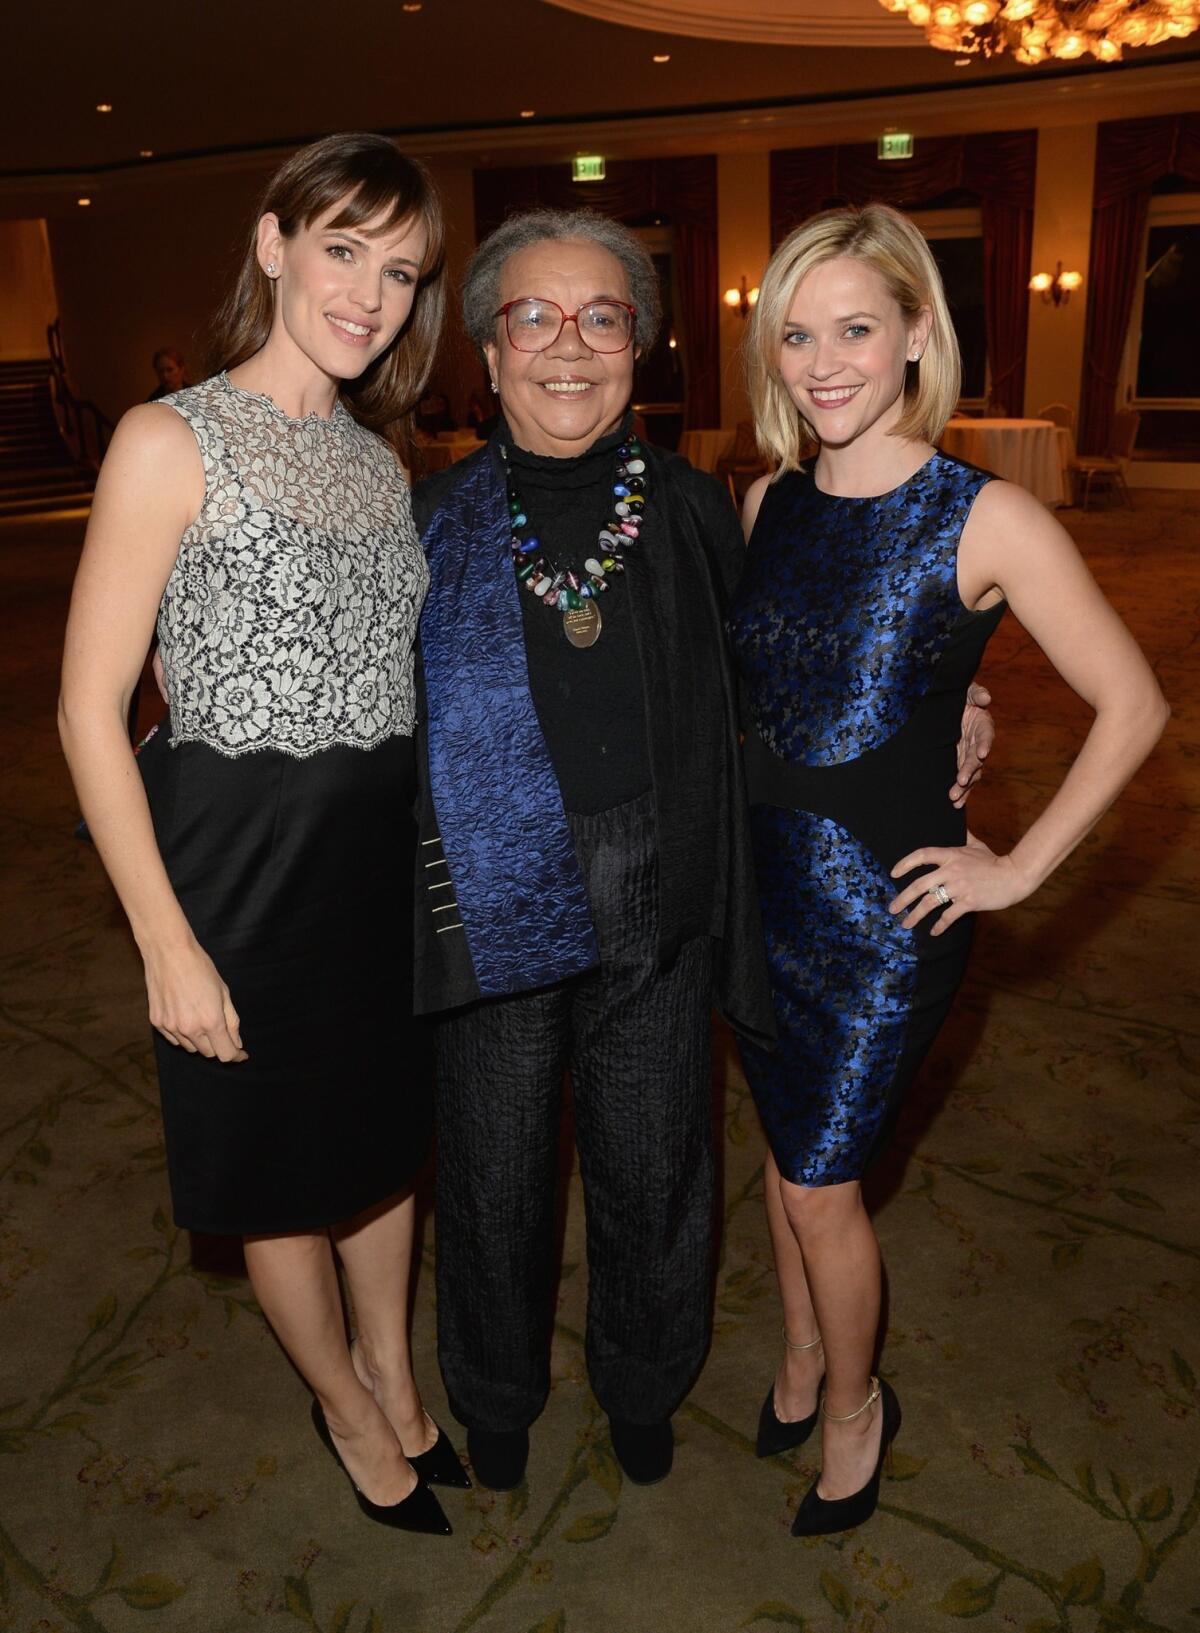 Presenter Jennifer Garner, left, Children's Defense Fund President Marian Wright Edelman and event co-Chair Reese Witherspoon at the 23rd Annual Beat The Odds Awards hosted by Children's Defense Fund-California on Thursday in Beverly Hills.